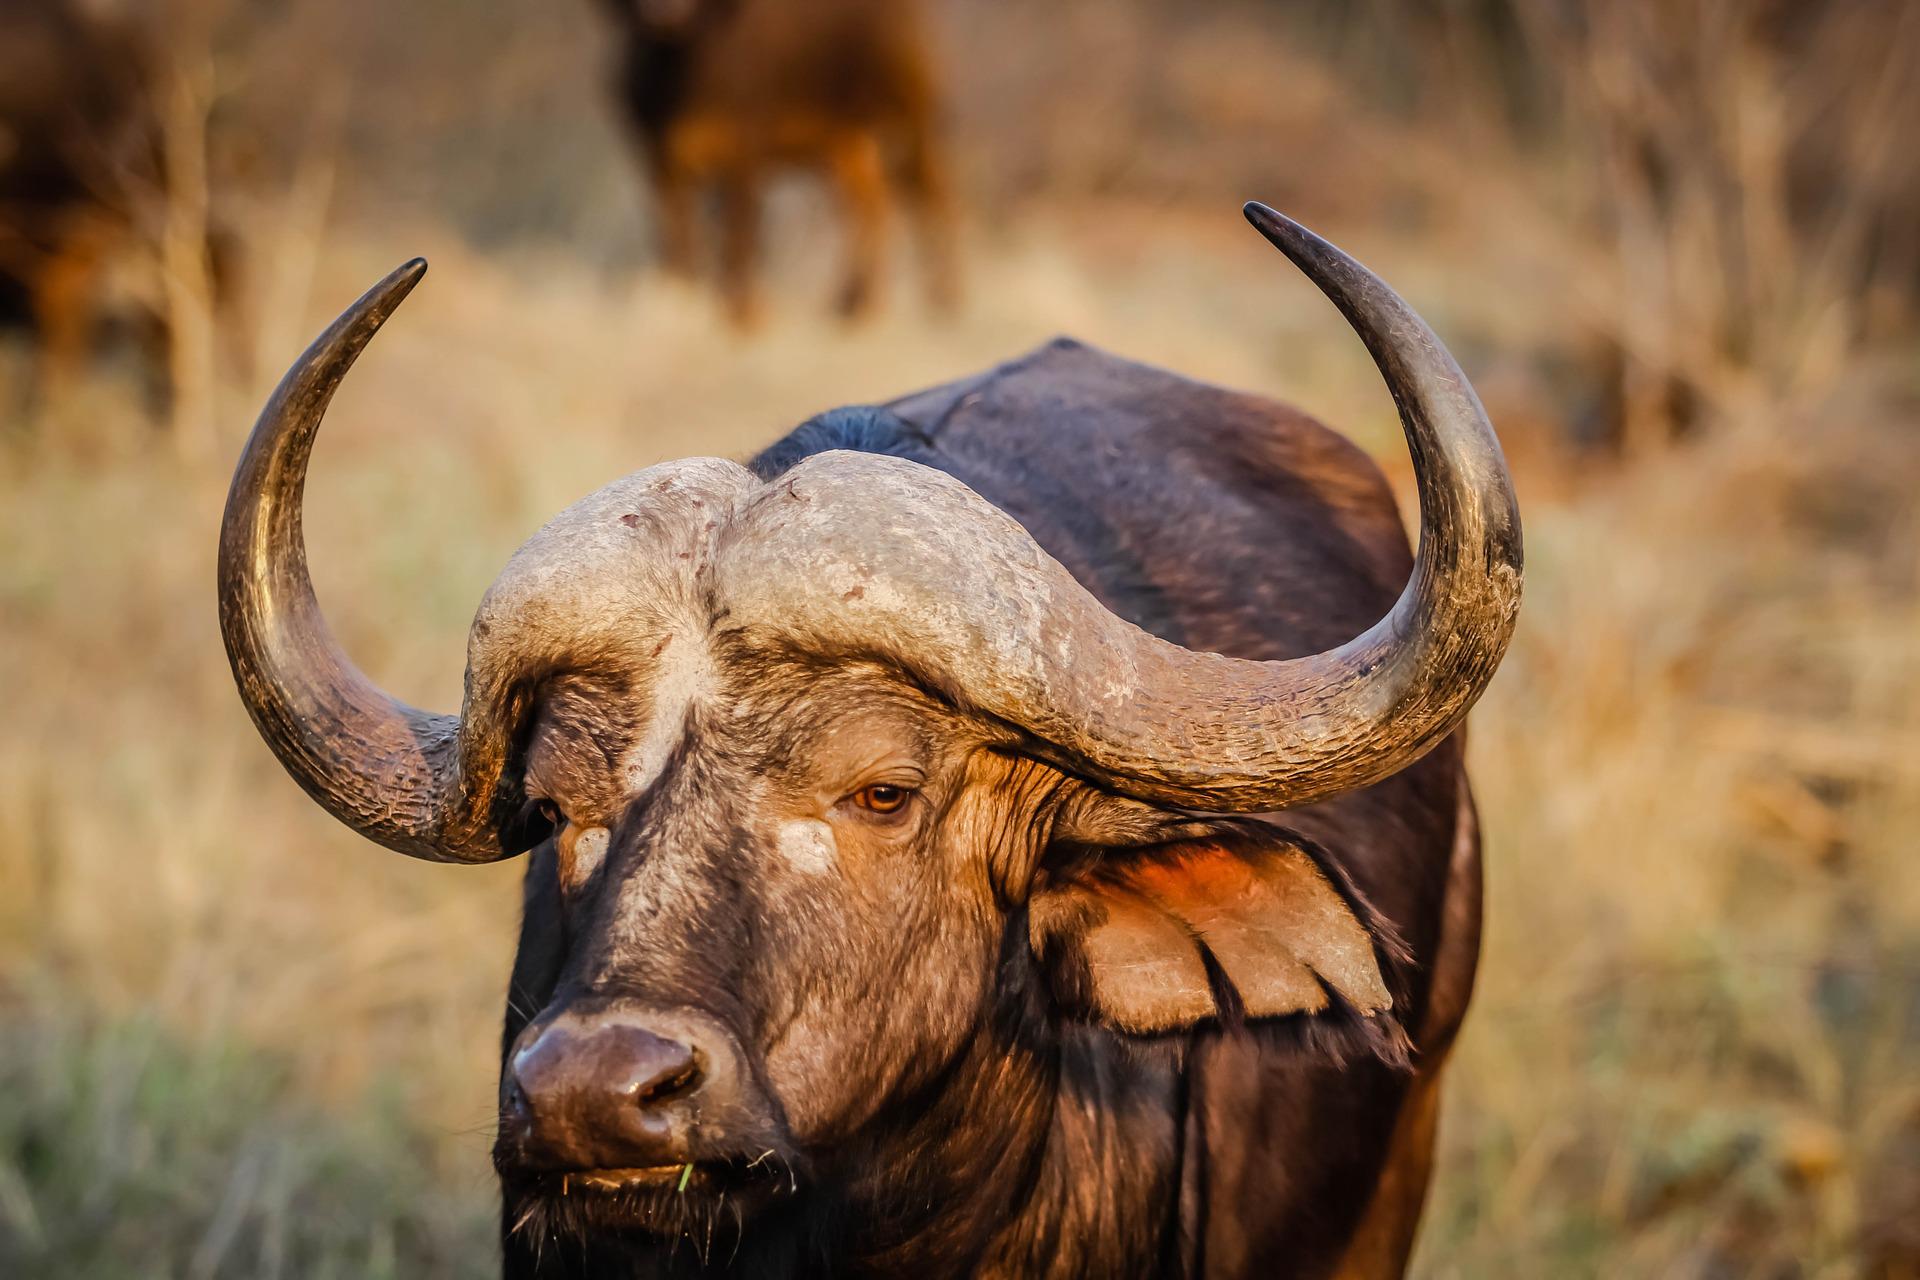 even-the-aged-buffalo-has-horns:-understanding-the-stubborn-and-formidable-strength-of-the-anc